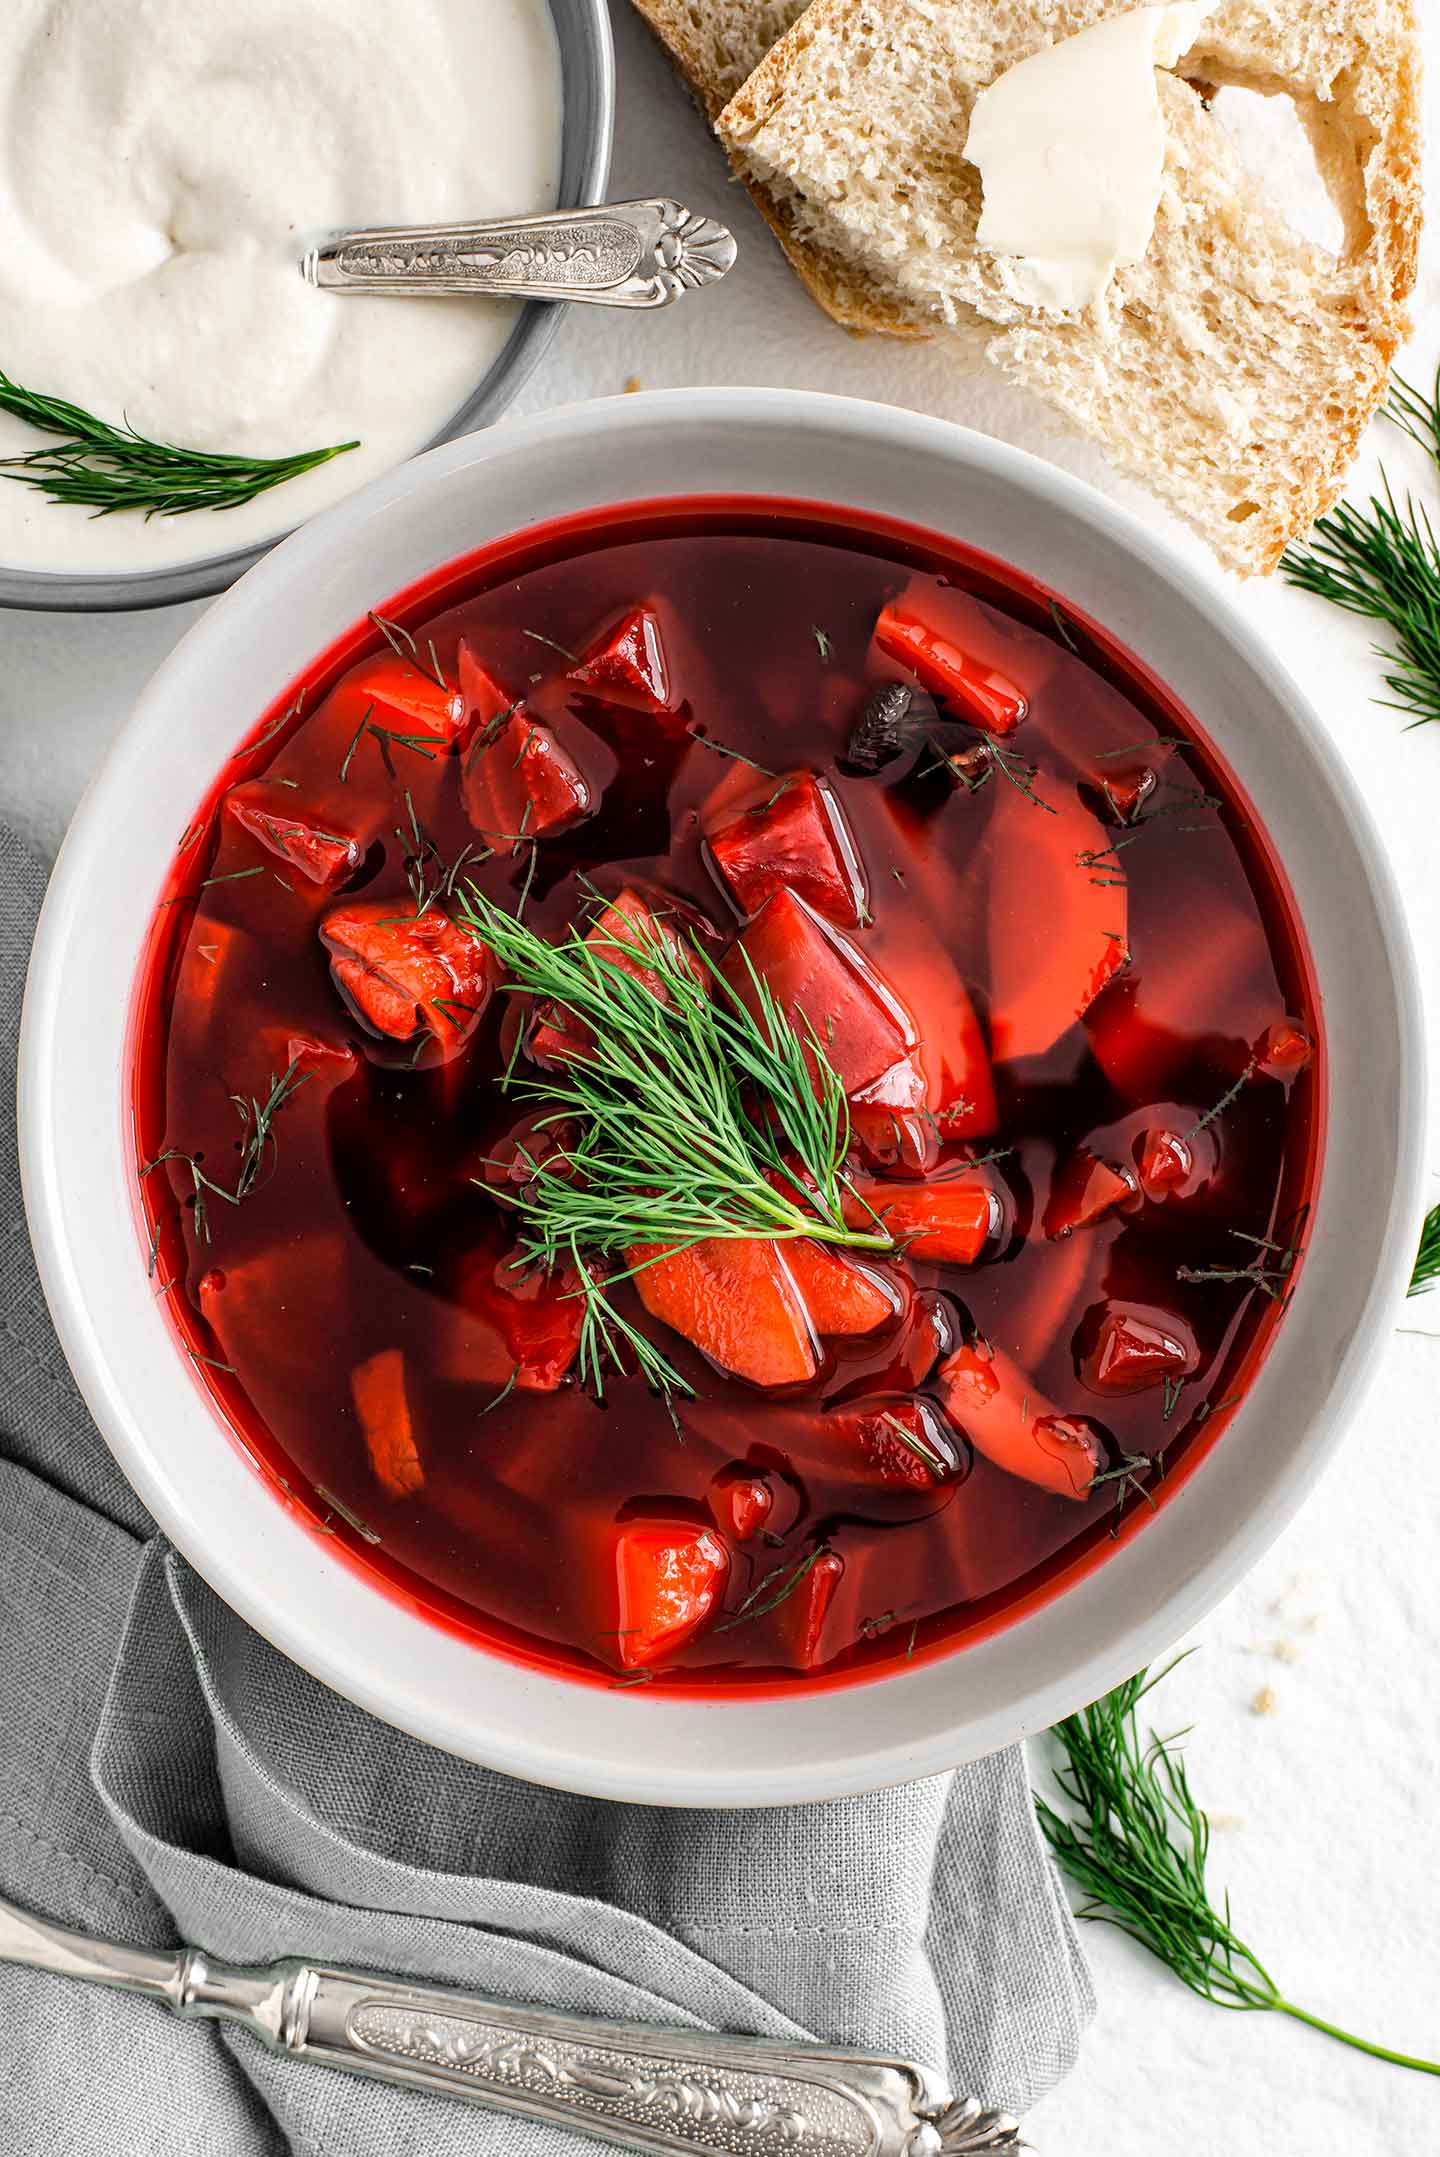 Top down view of vegan borscht in a bowl. Chunky beets, potatoes, carrot, and mushrooms are visible through the red broth. A sprig of fresh dill garnishes.